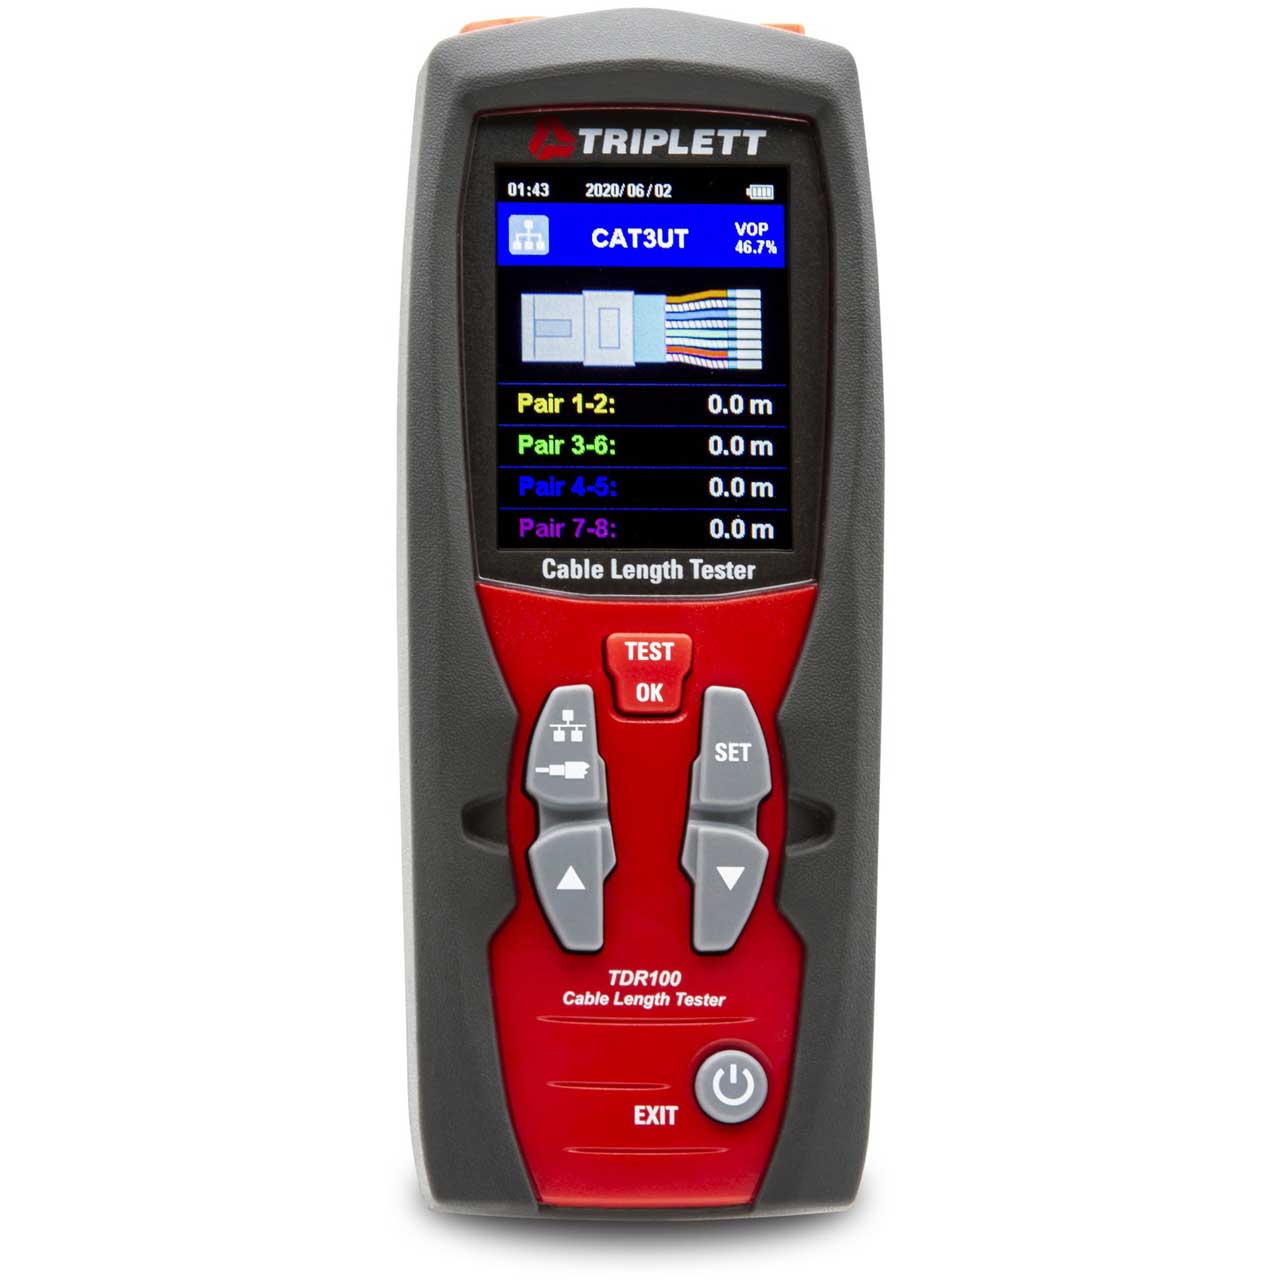 Triplett TDR100 Precision Cable Length Tester - Uses Time Domain Reflectometer Technology & 20 Built In VOPs TRIPL-TDR100